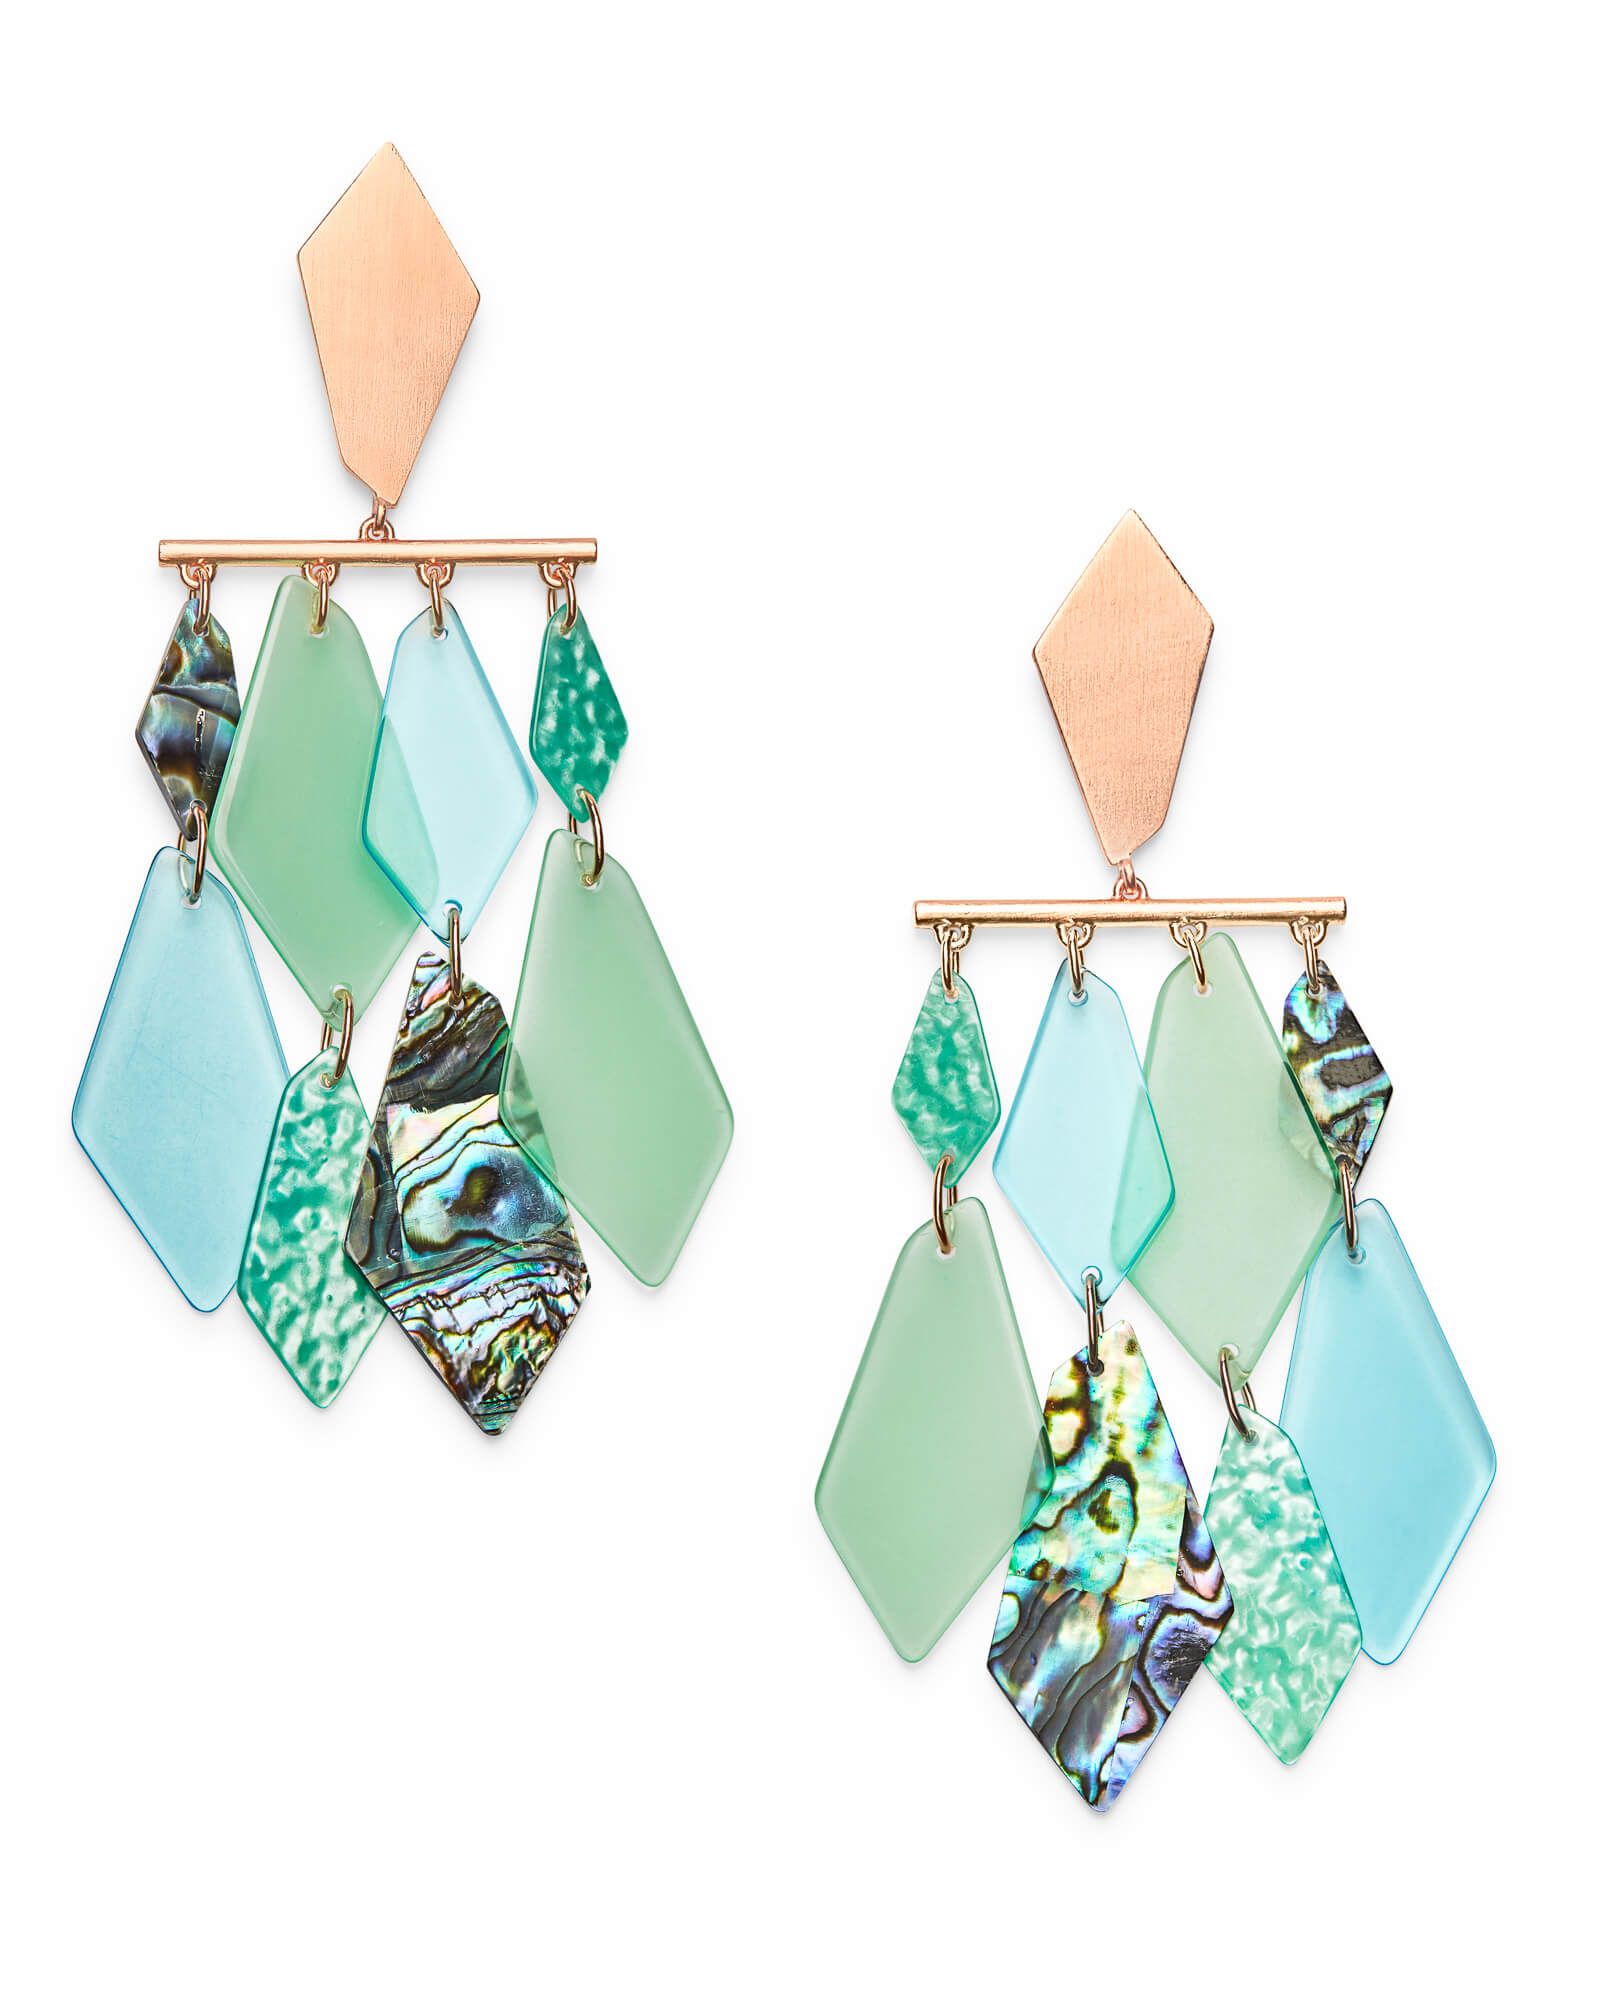 Hanna Rose Gold Statement Earrings in Abalone Mix | Kendra Scott